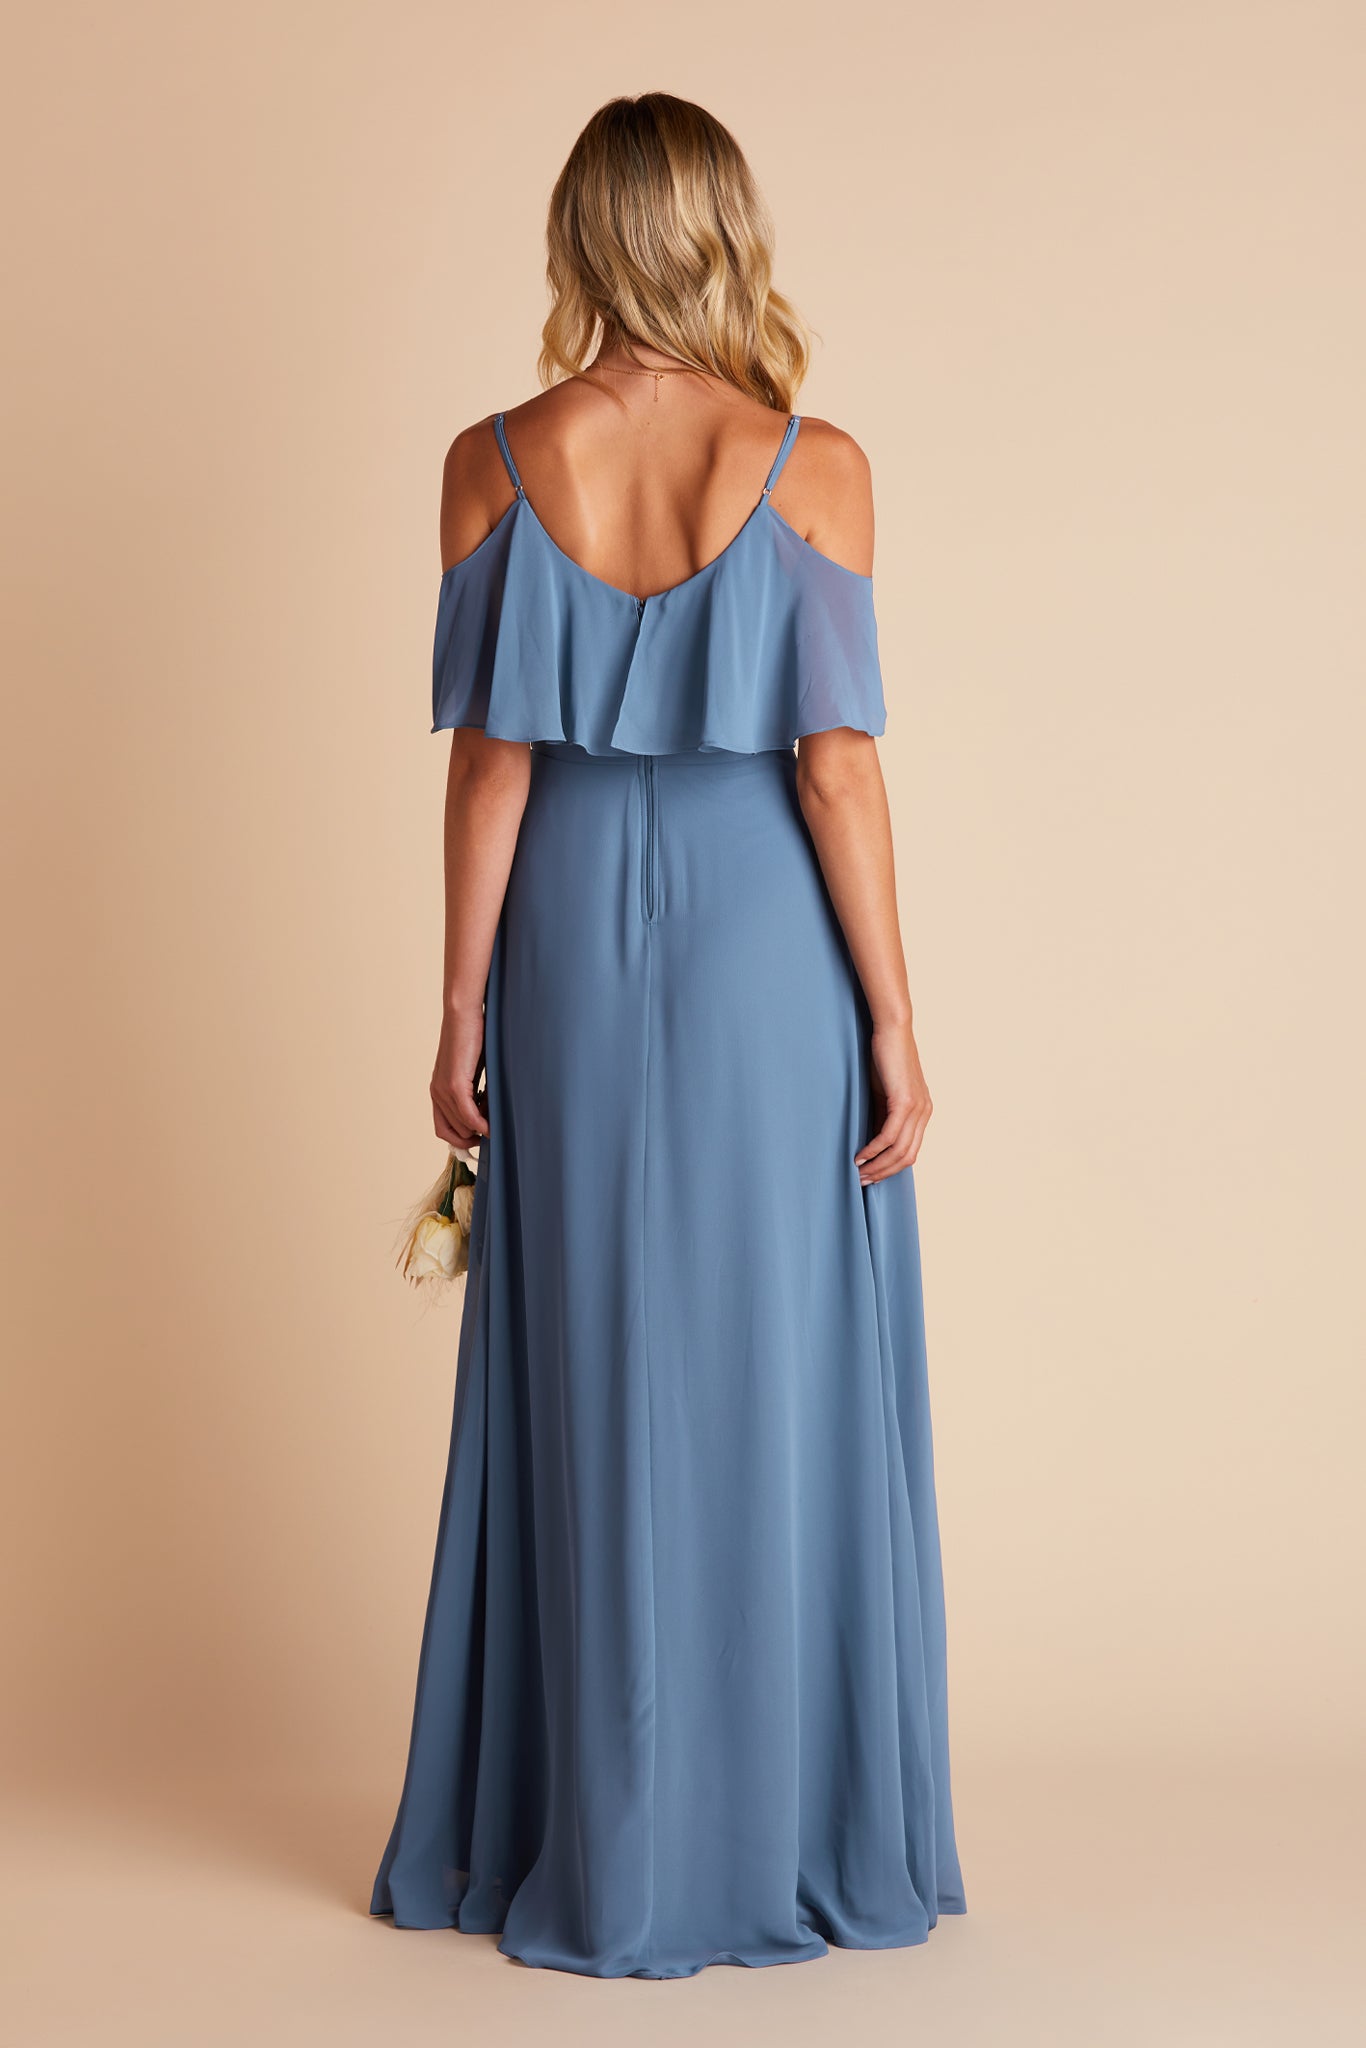 Jane convertible bridesmaid dress with slit in twilight blue chiffon by Birdy Grey, back view